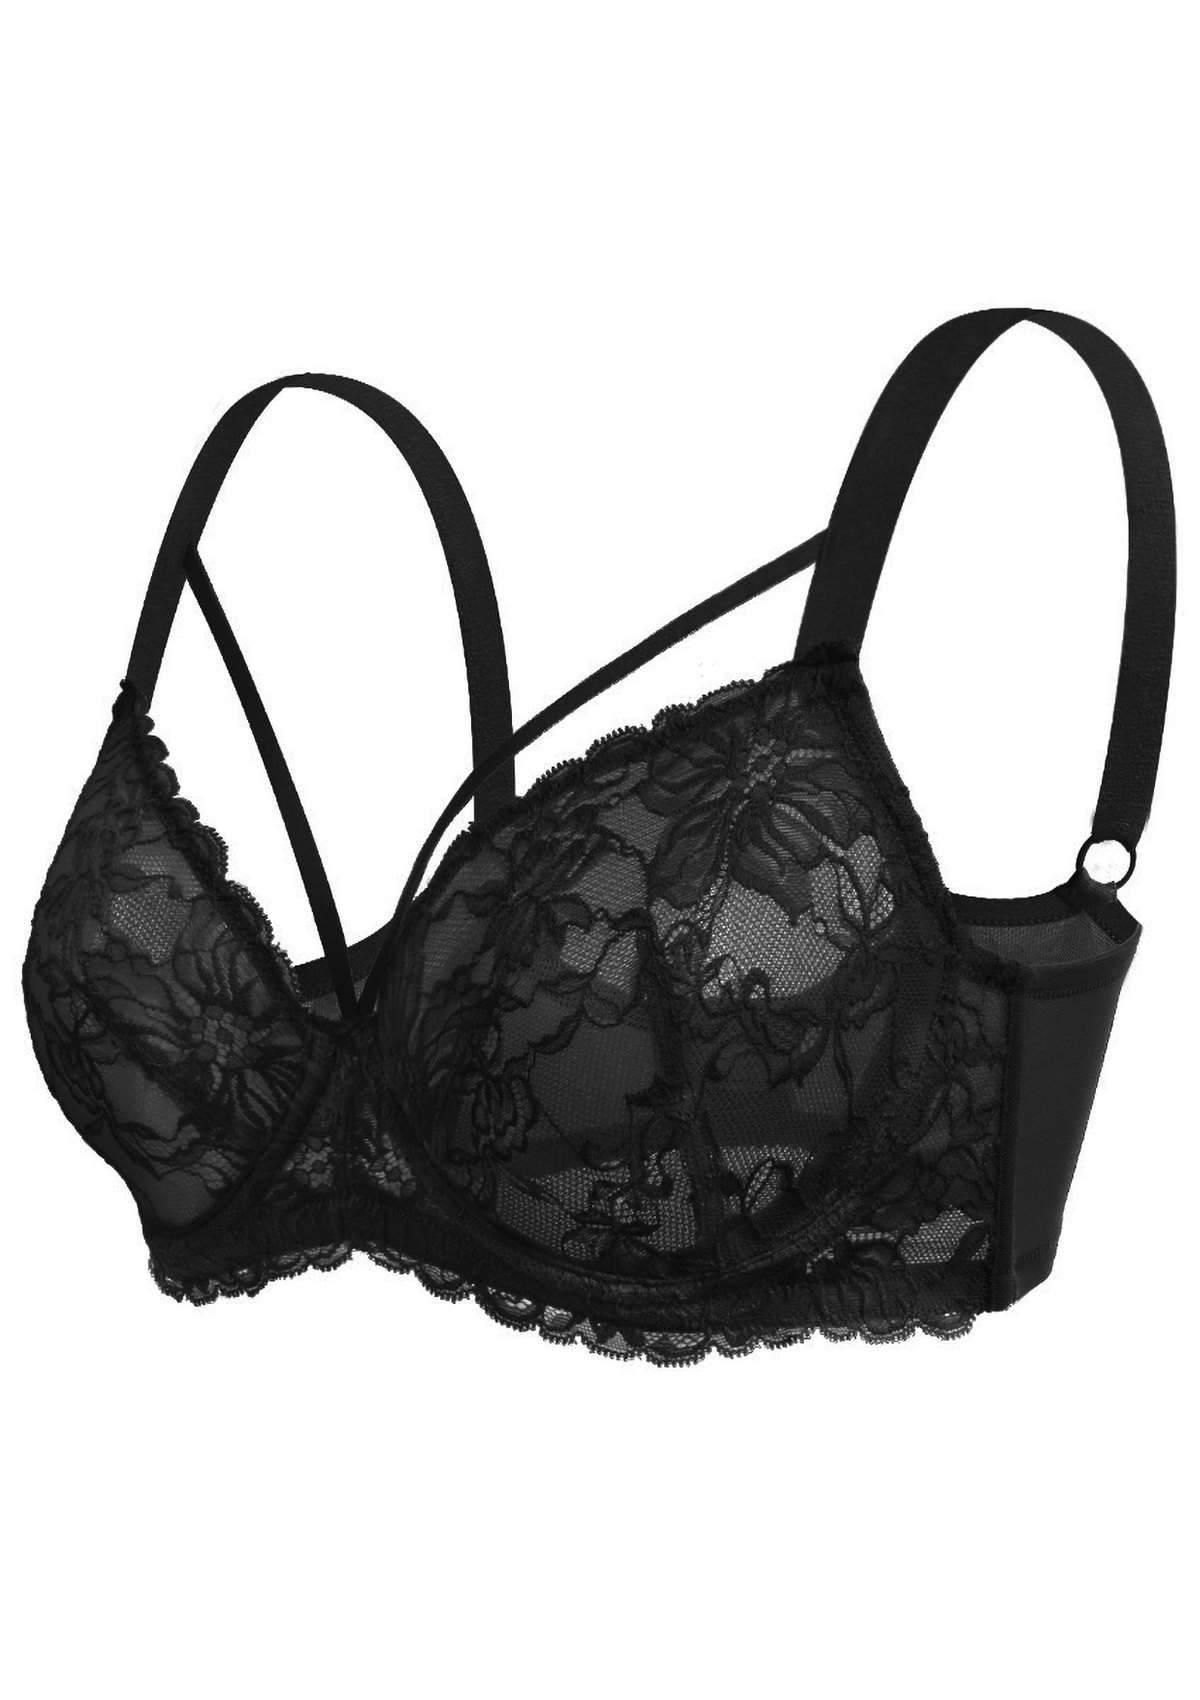 HSIA Pretty In Petals Bra - Plus Size Lingerie For Comfrot And Support - Black / 40 / B